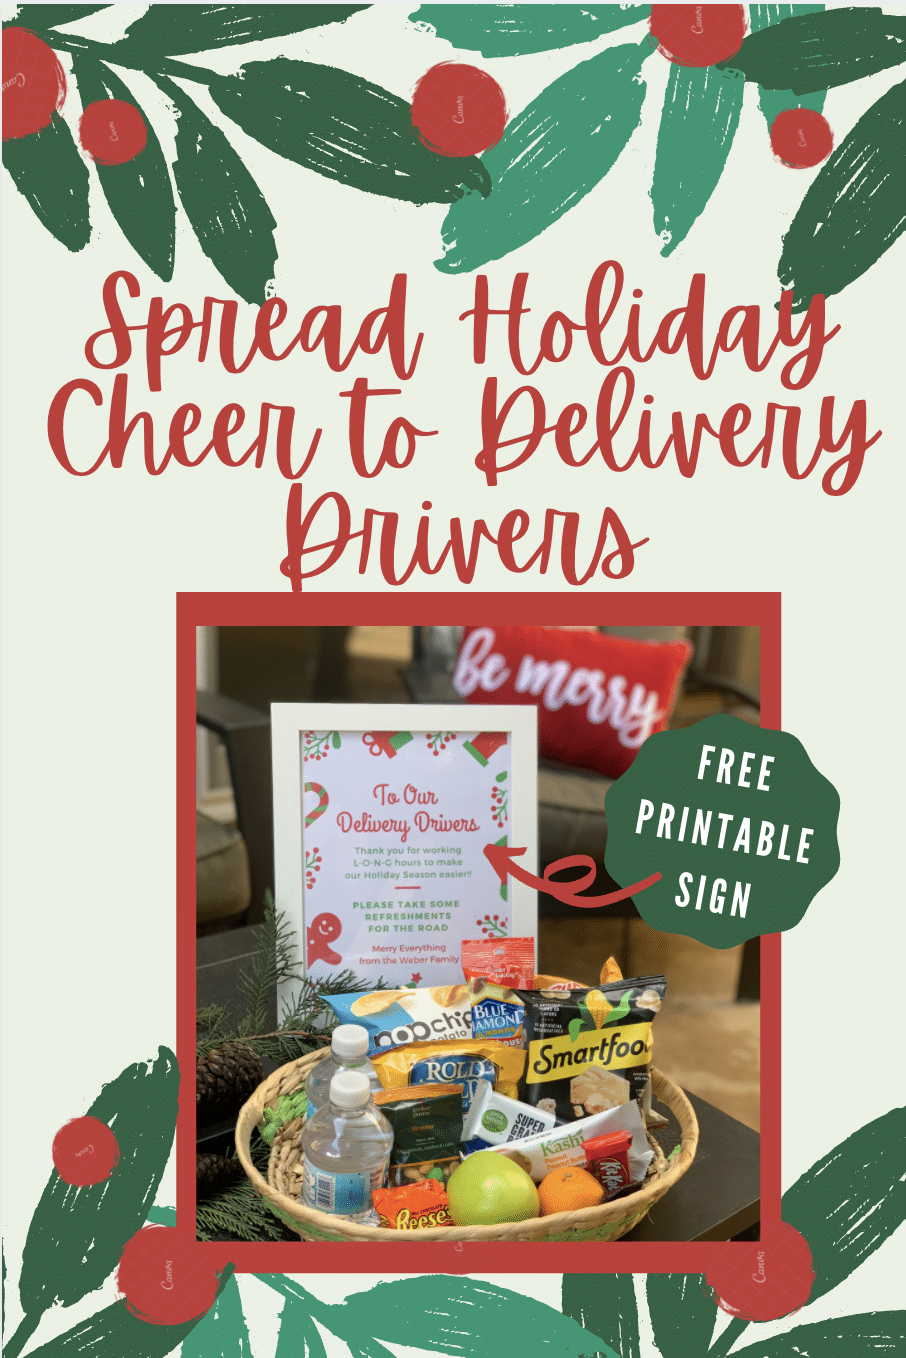 Spread Holiday Cheer to Delivery Drivers